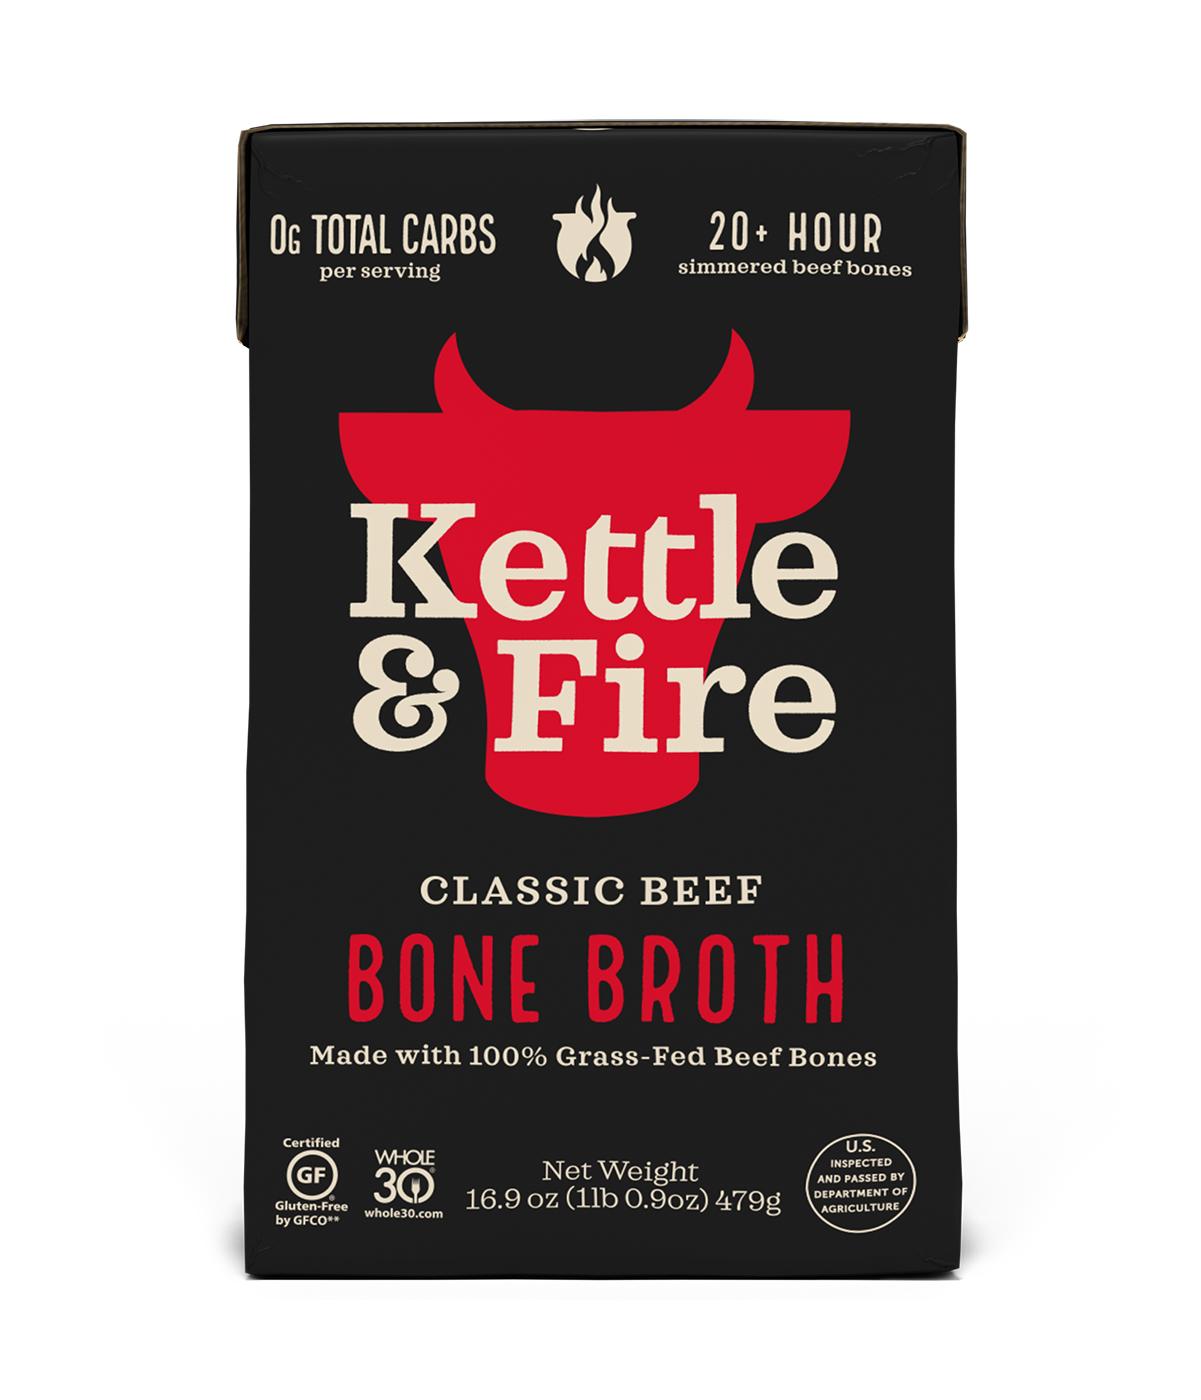 Kettle & Fire Classic Beef Bone Broth; image 1 of 2